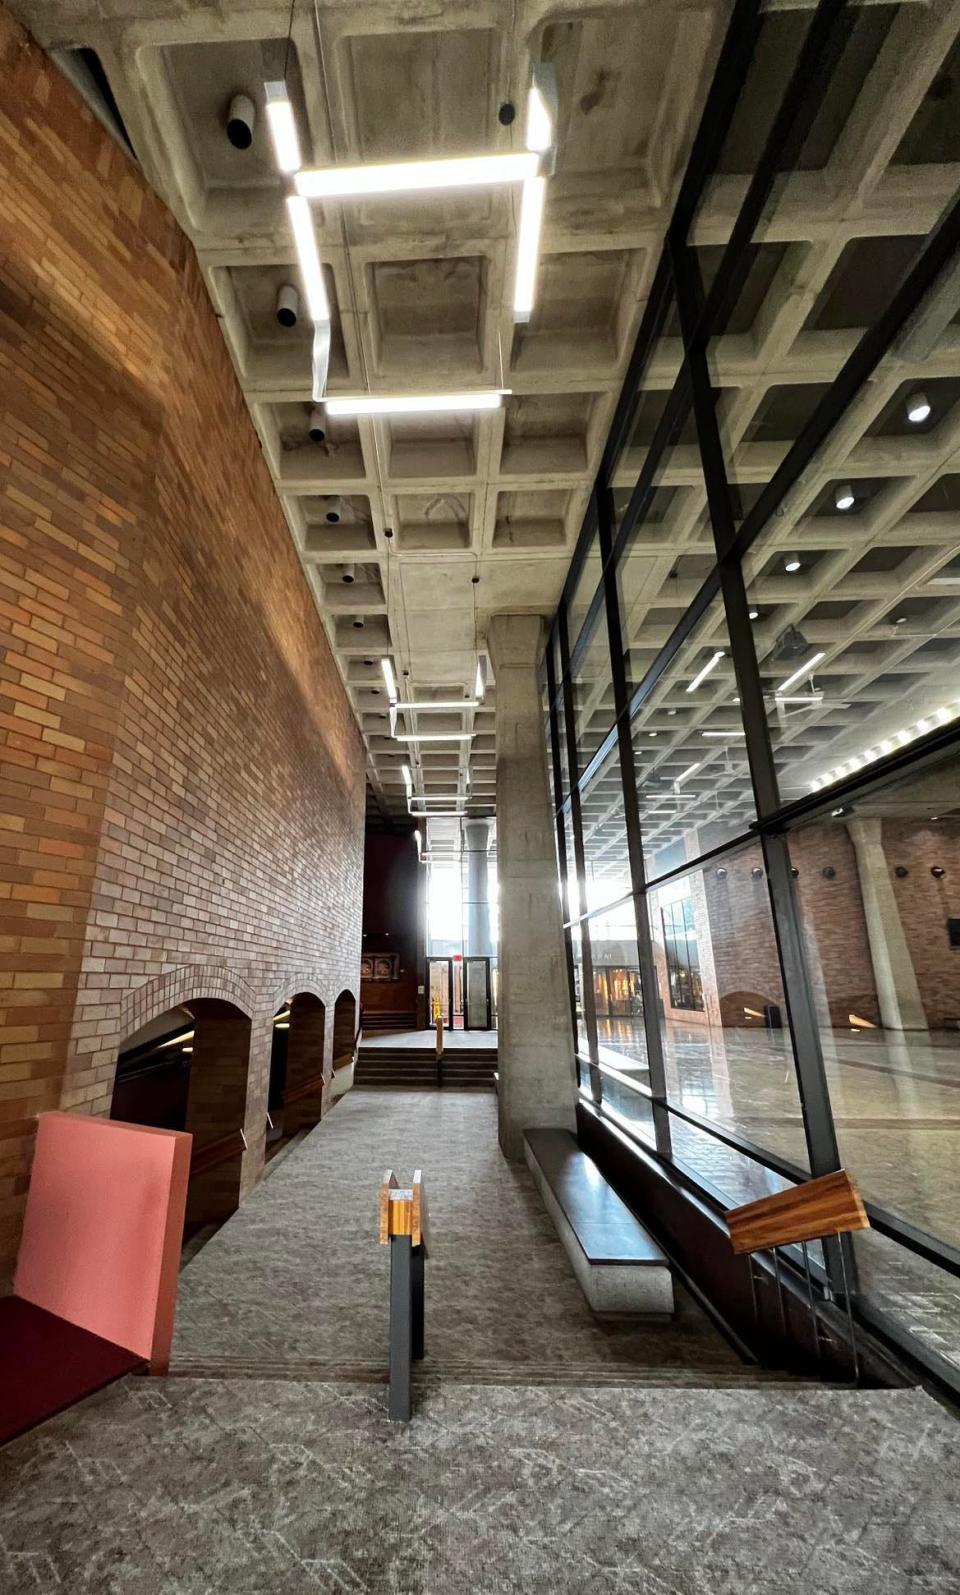 The Cultural Center for the Arts Theater lobby has been renovated with an expanded exit area, new carpet and new stylized overhead lighting.